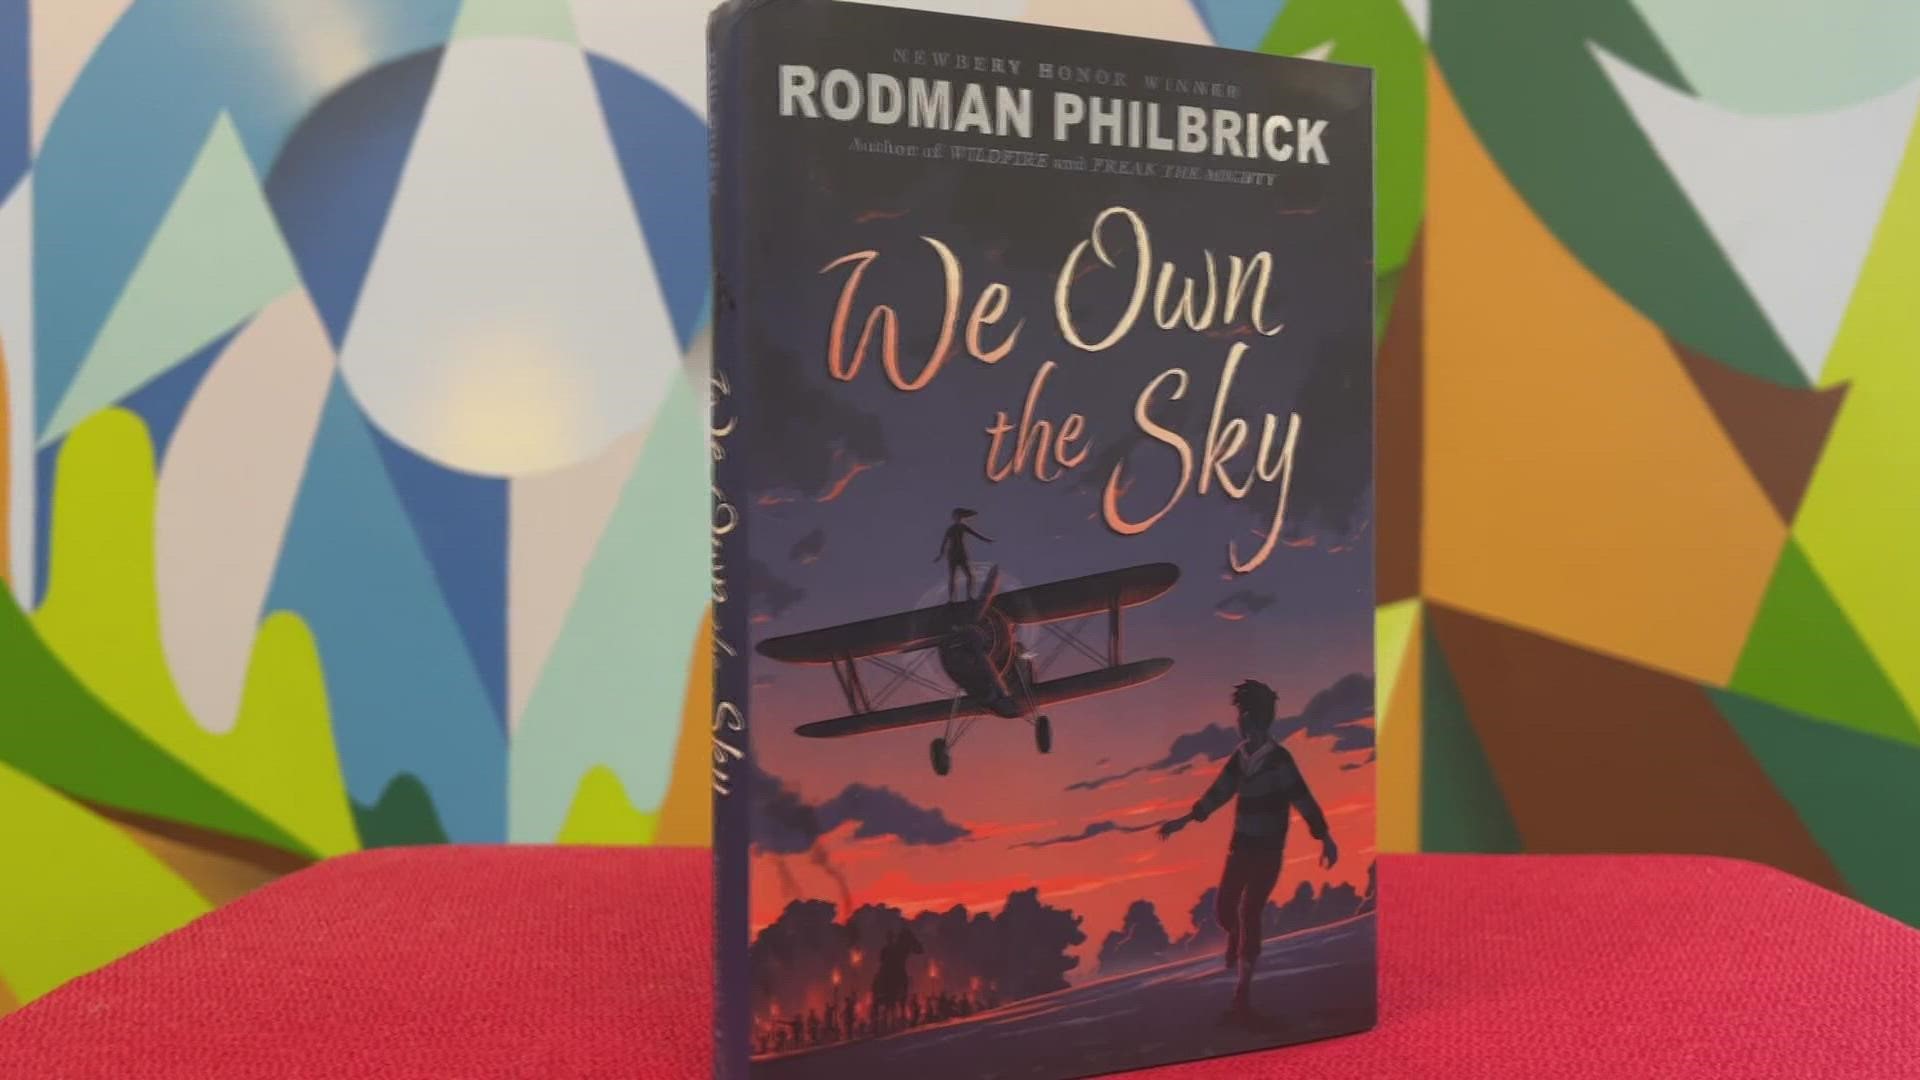 For Rodman Philbrick, getting the story right took time: “I first had the idea twenty years ago and the book is just out now”